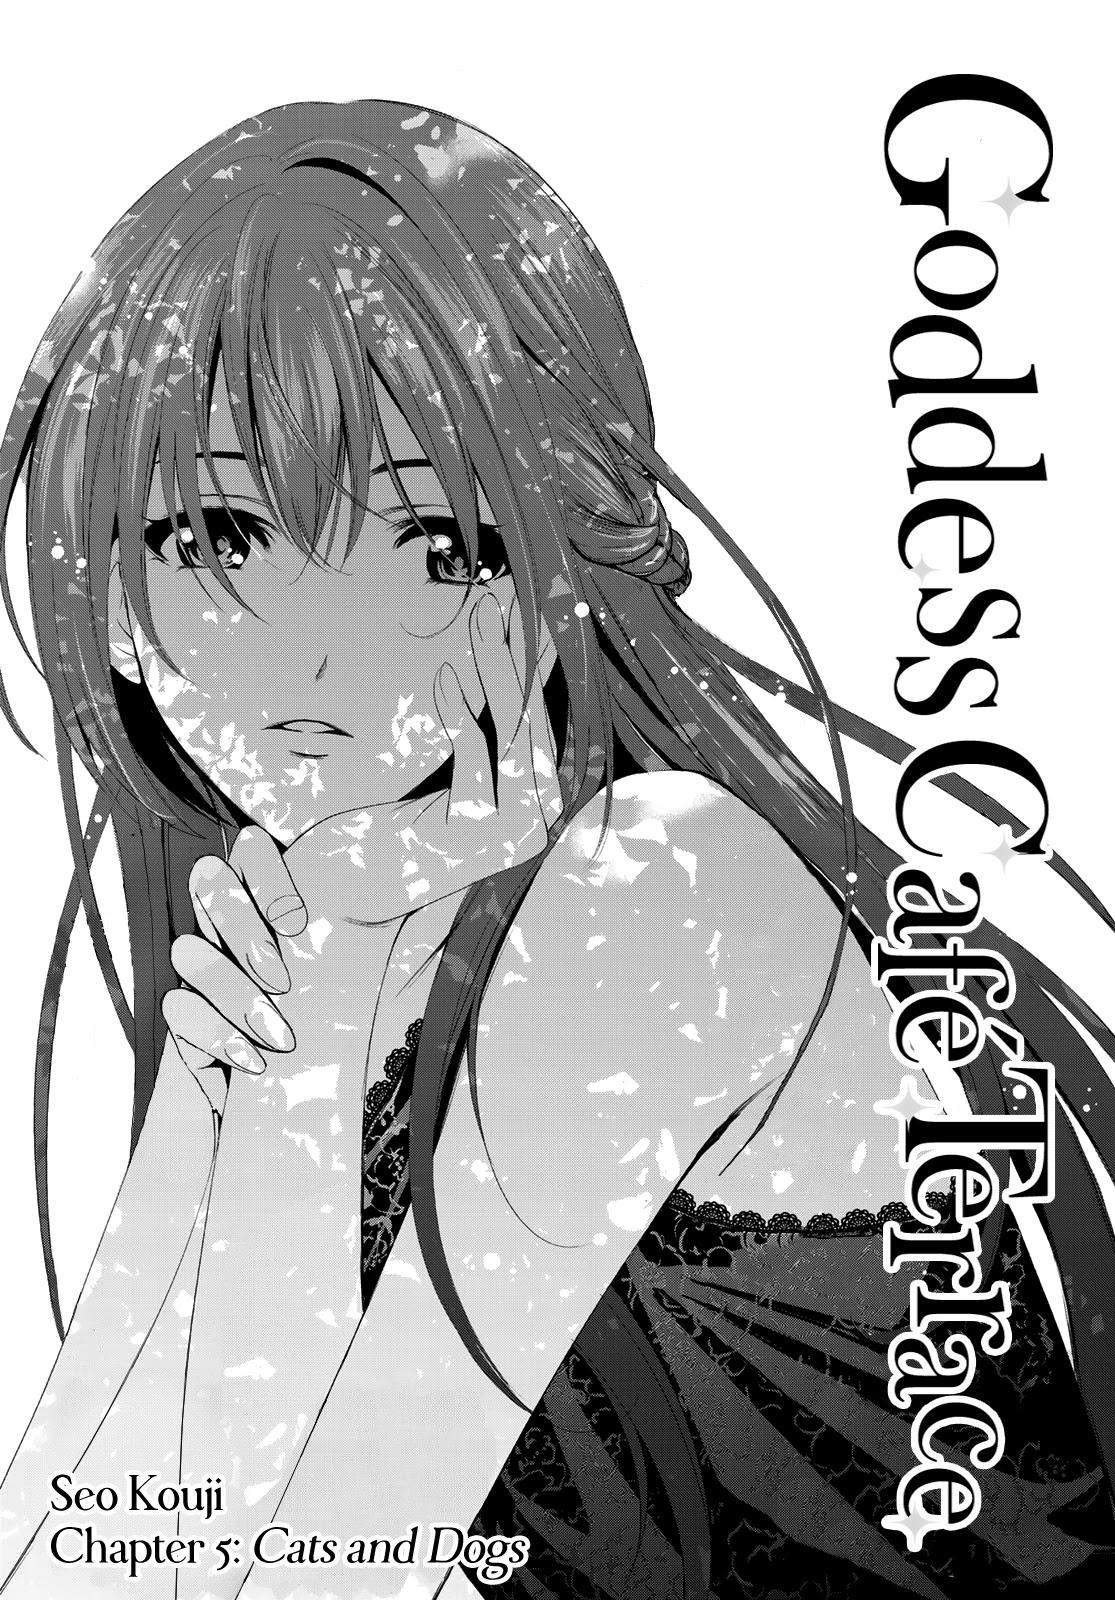 Read Megami no Cafe Terrace Manga Chapter 44 in English Free Online